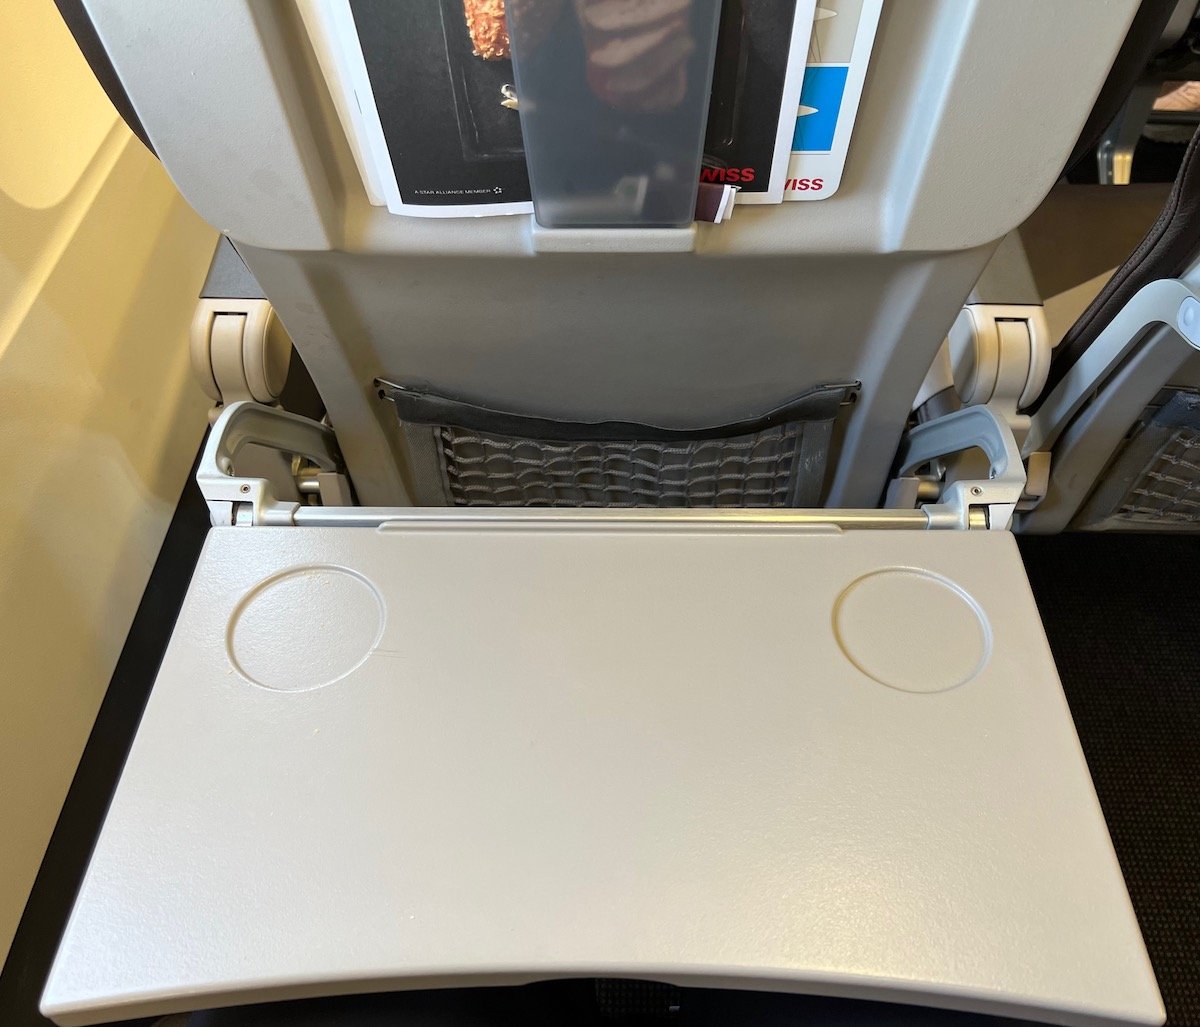 Review: SWISS A320 Business Class (NCE-ZRH) - One Mile at a Time